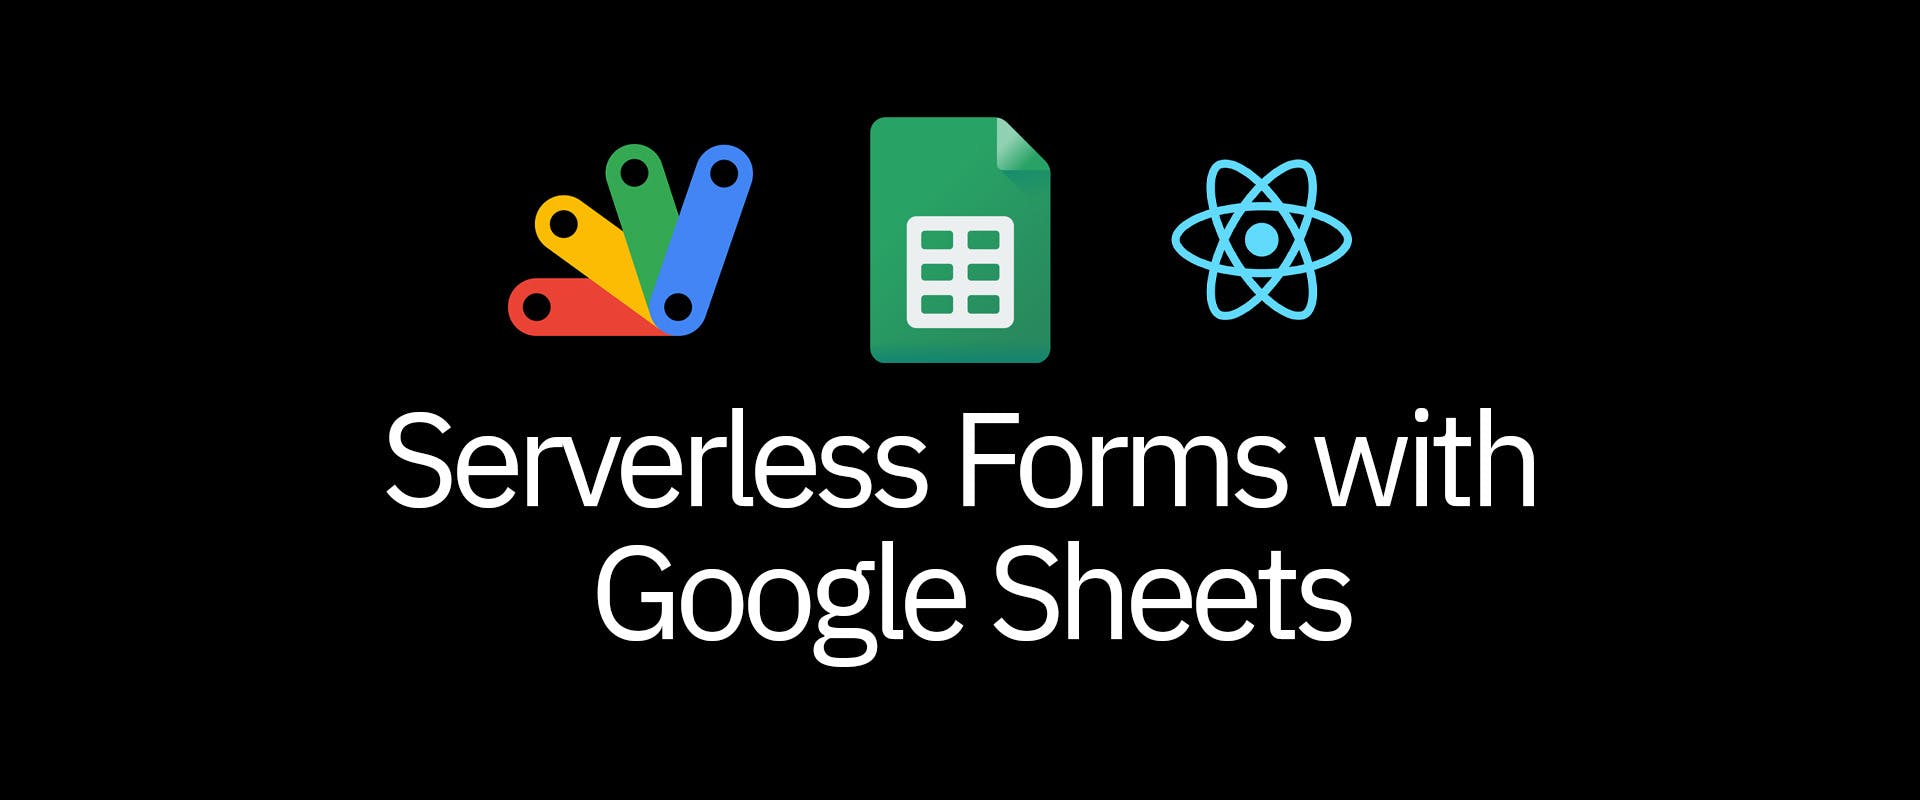 Serverless Forms with Google Sheets